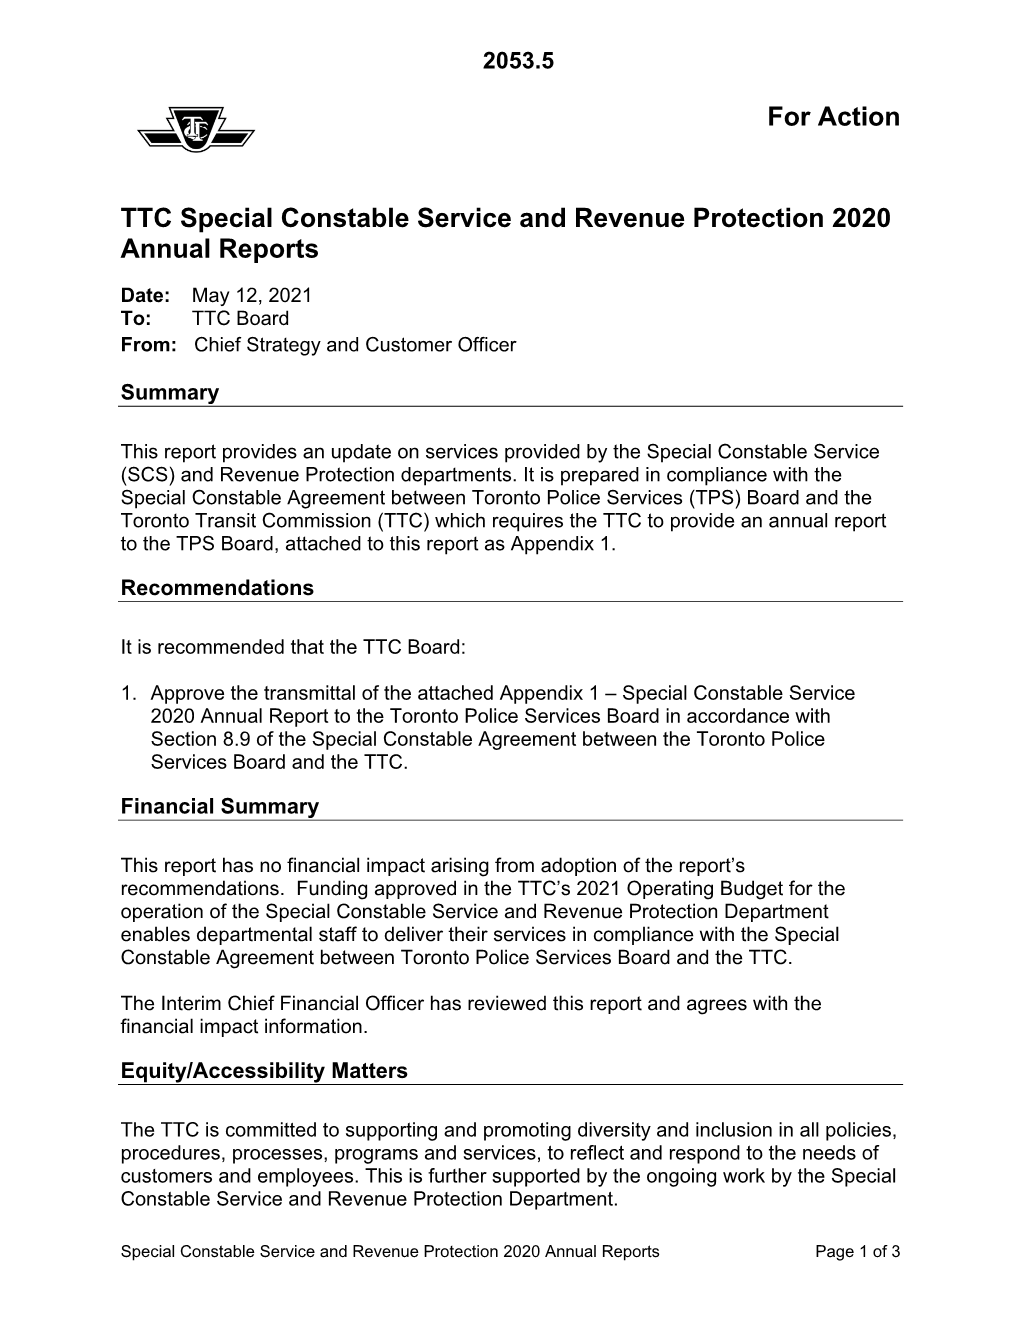 TTC Special Constable Service and Revenue Protection 2020 Annual Reports